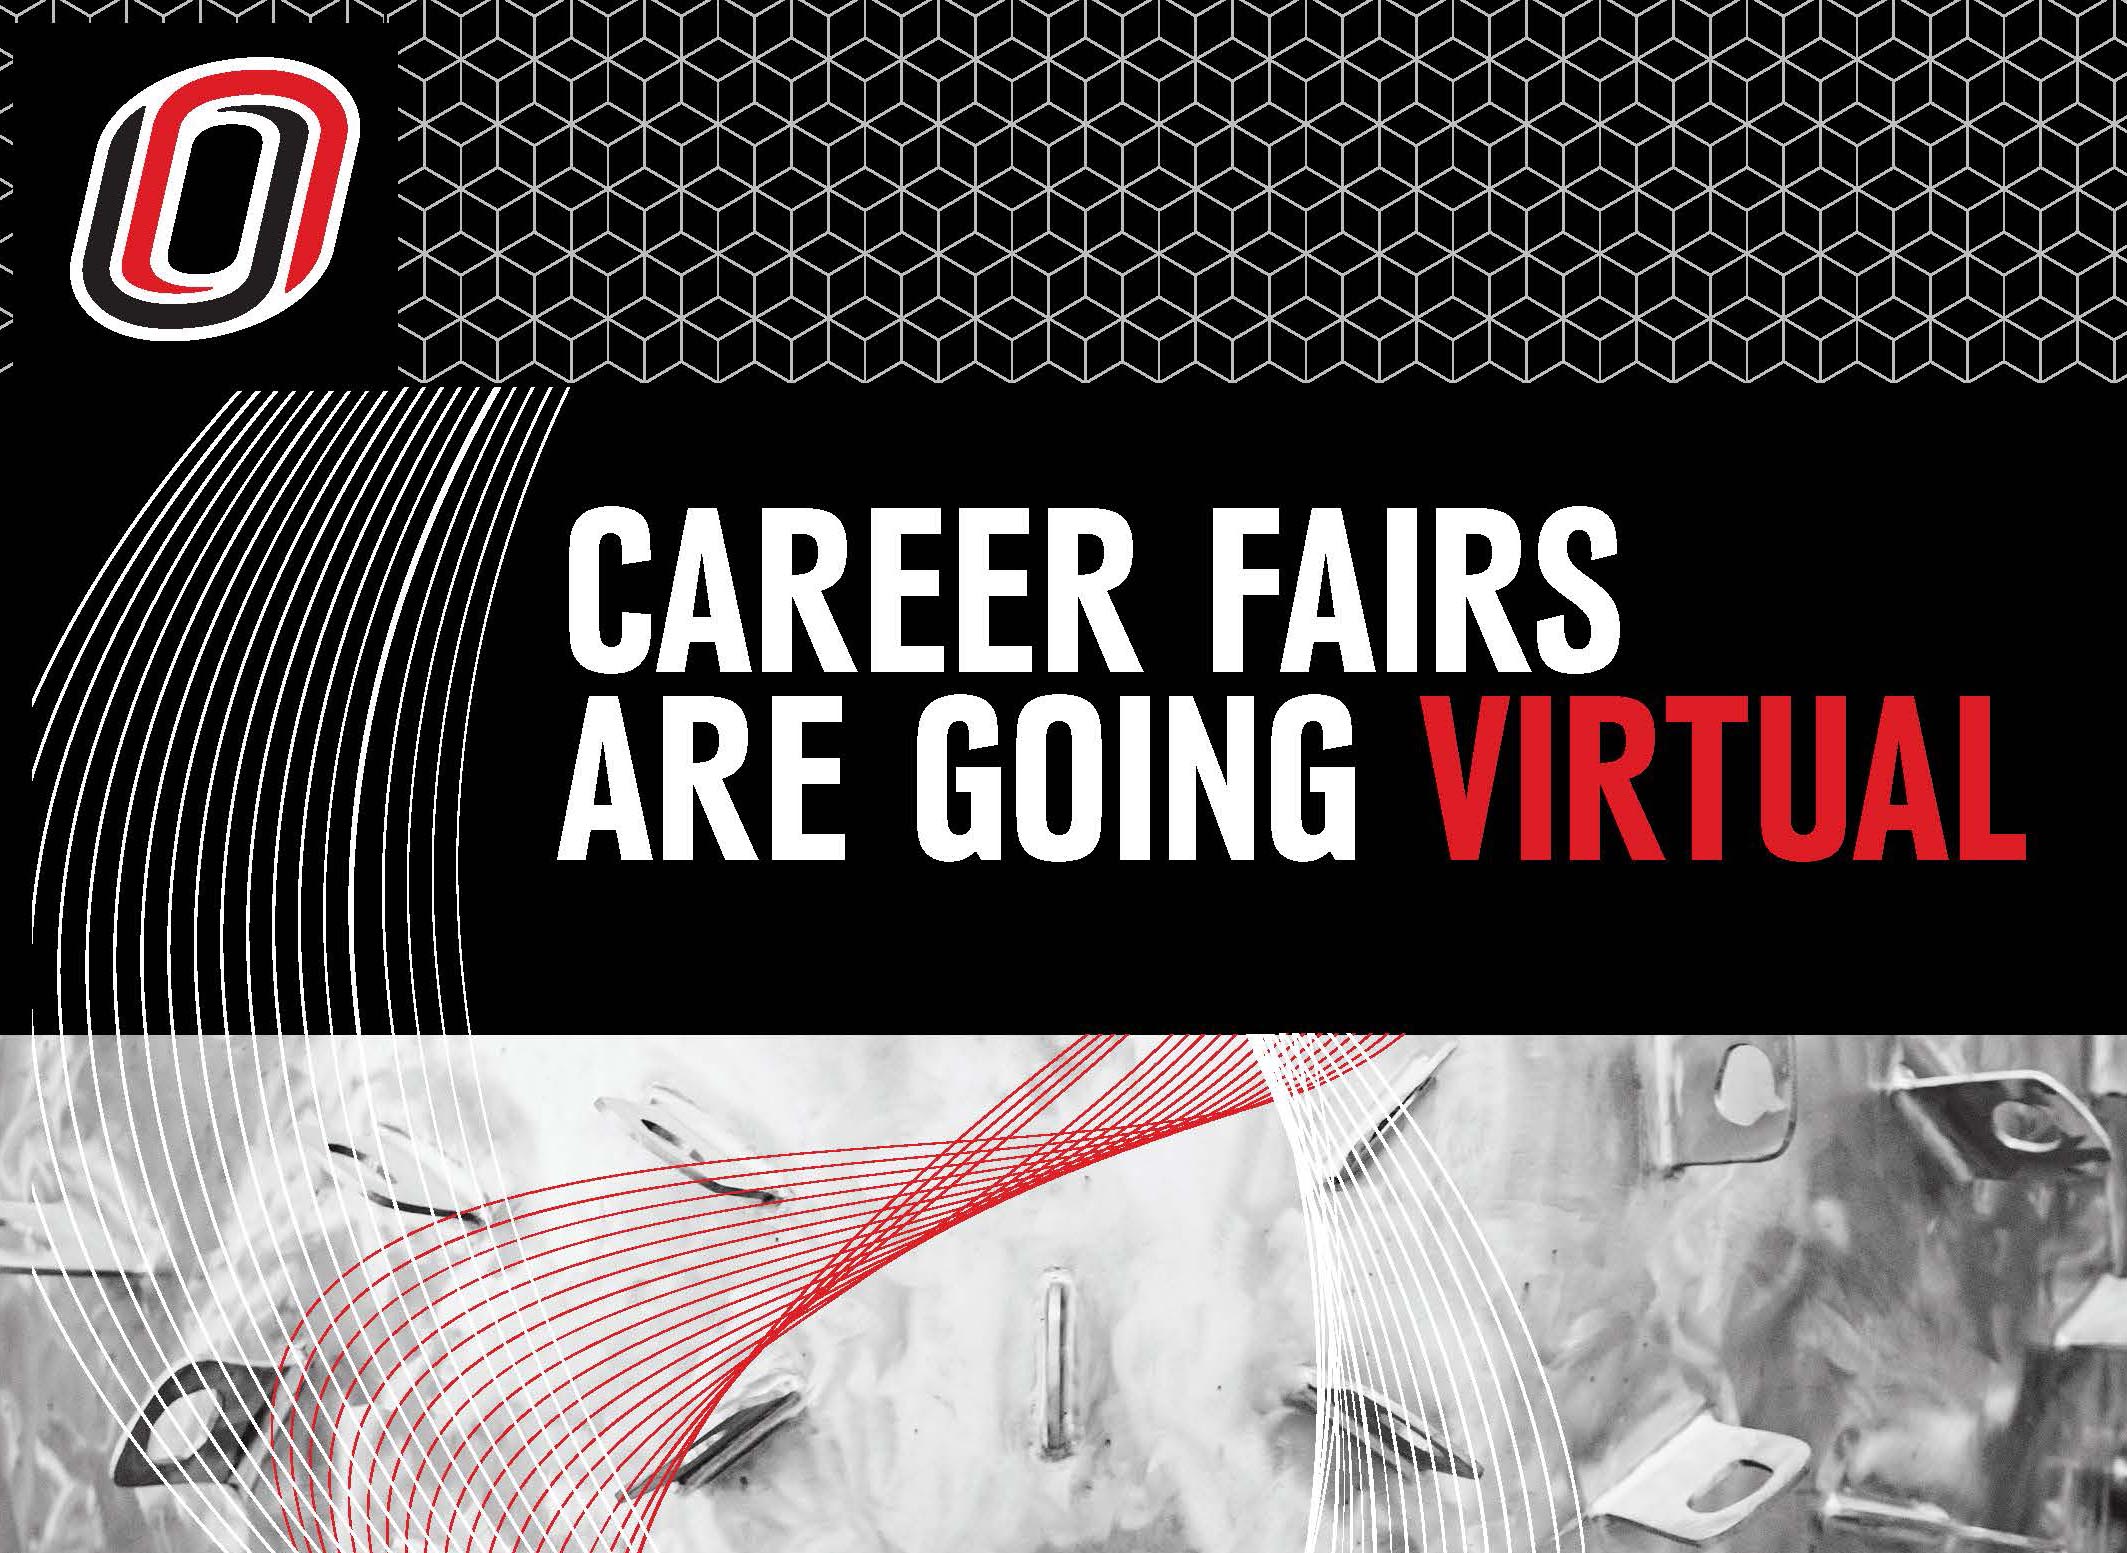 Career Fairs are going virtually this semester